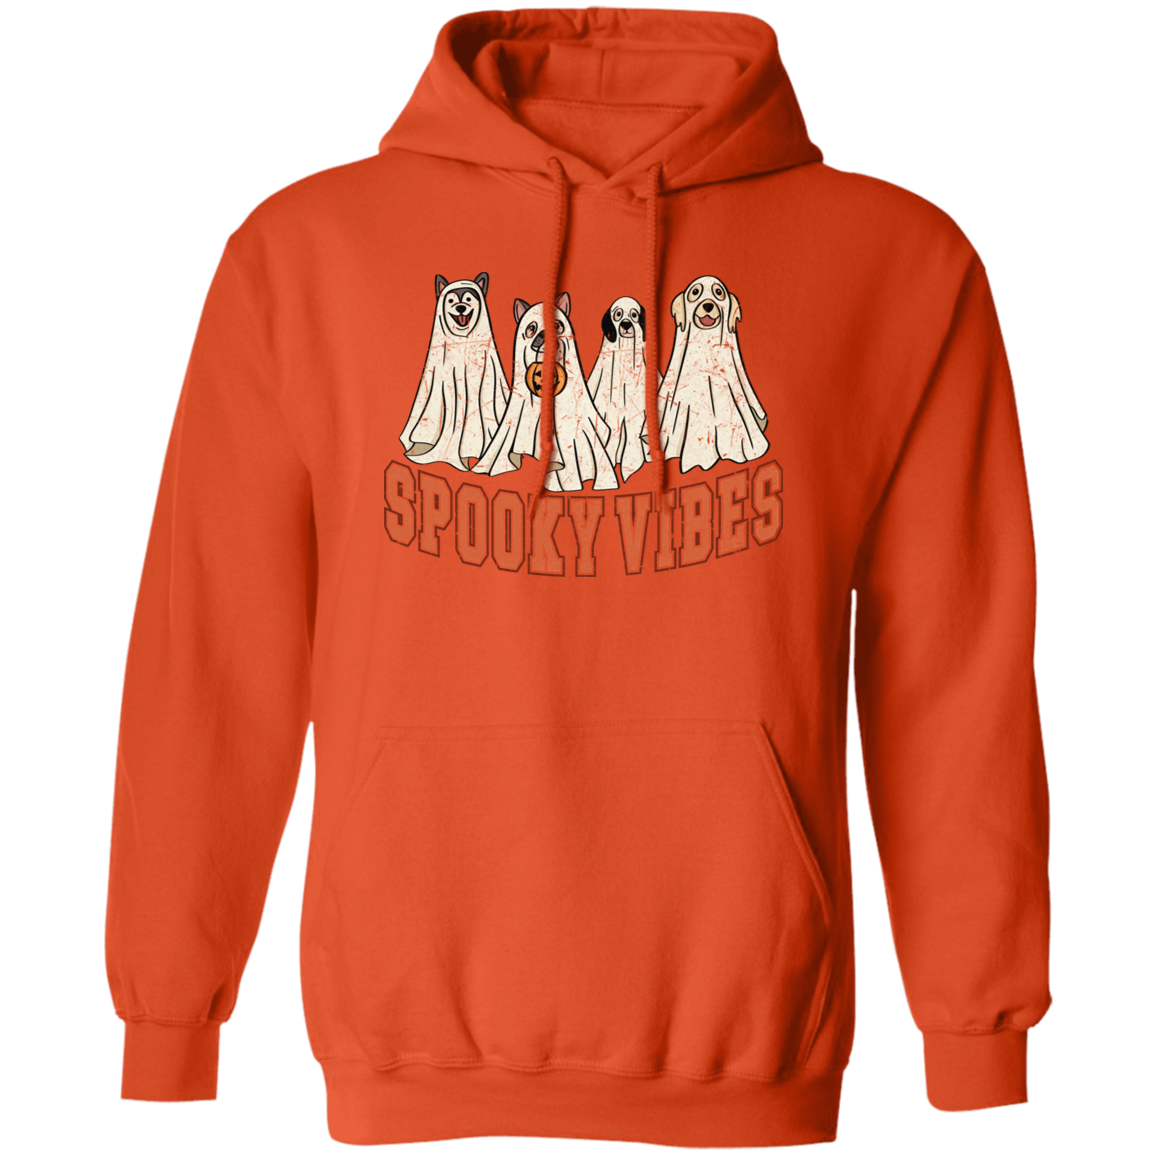 Retro Spooky Vibes Halloween Dogs Pullover Hoodie